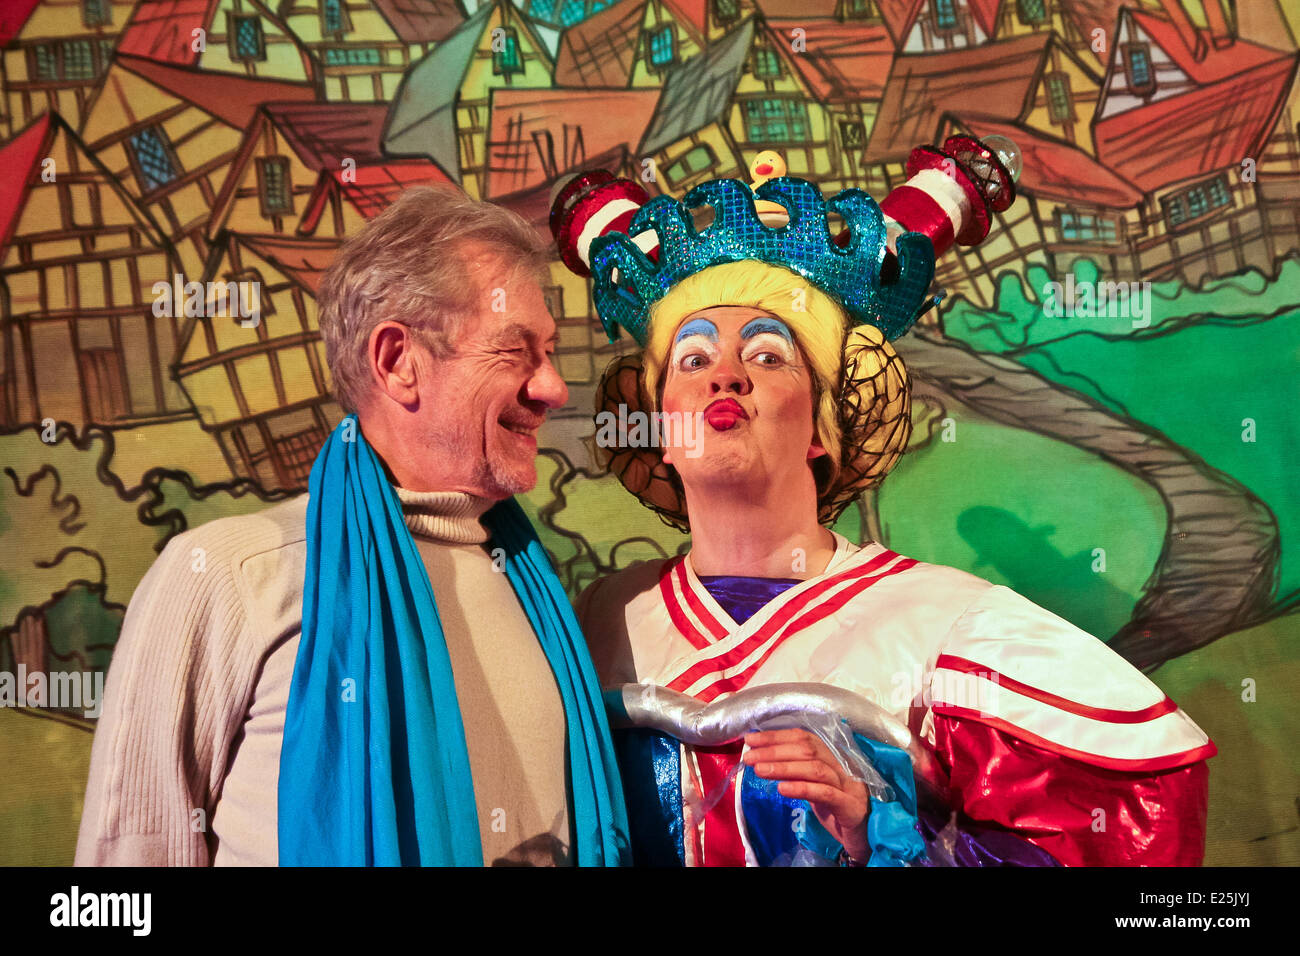 British actor Sir Ian McKellen with Pantomime Dame in London's West End Theatre Stock Photo